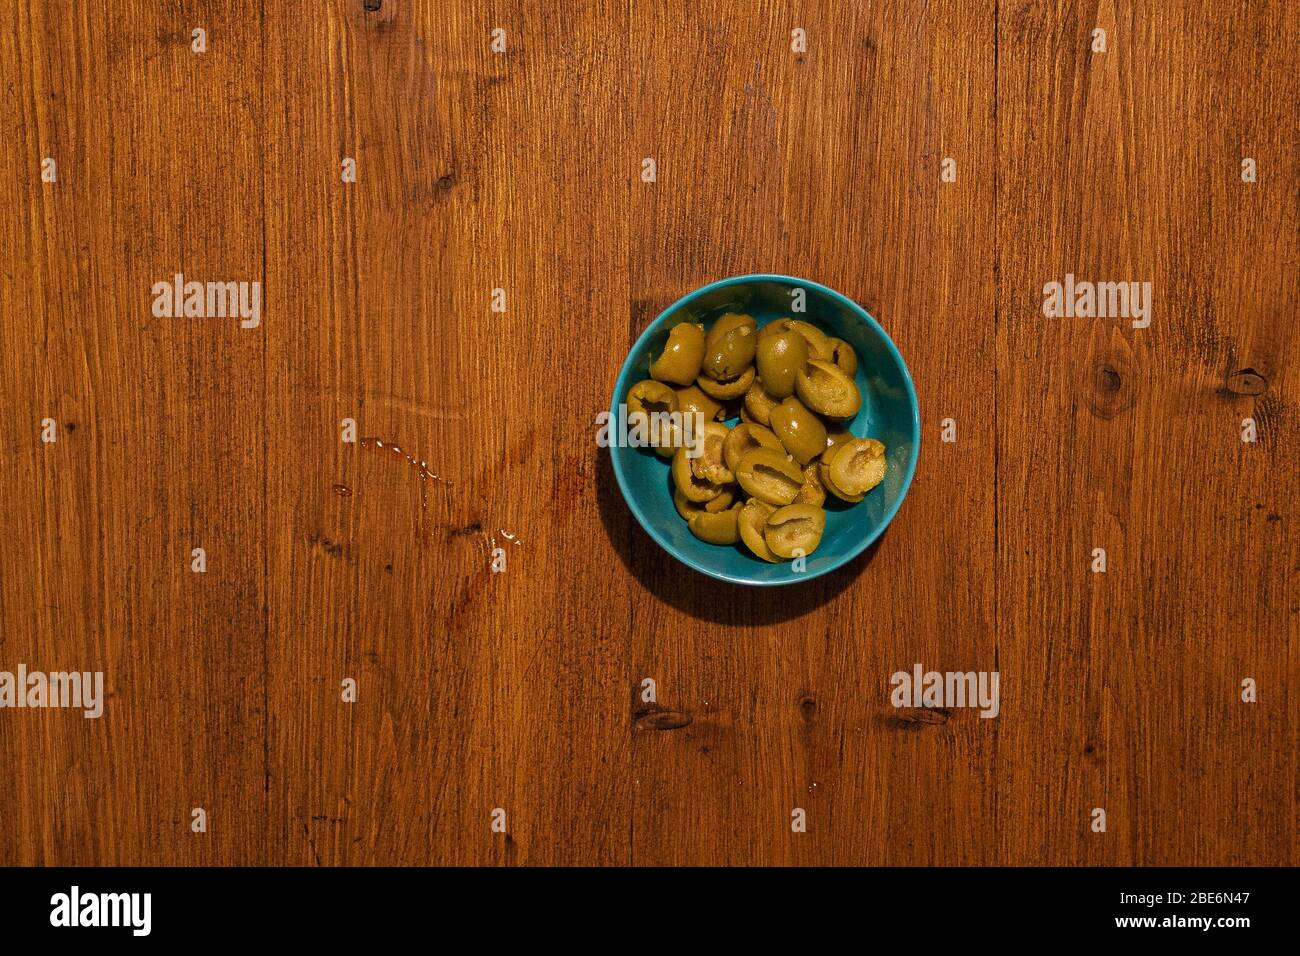 Top view of bowl full of olives on wooden background Stock Photo